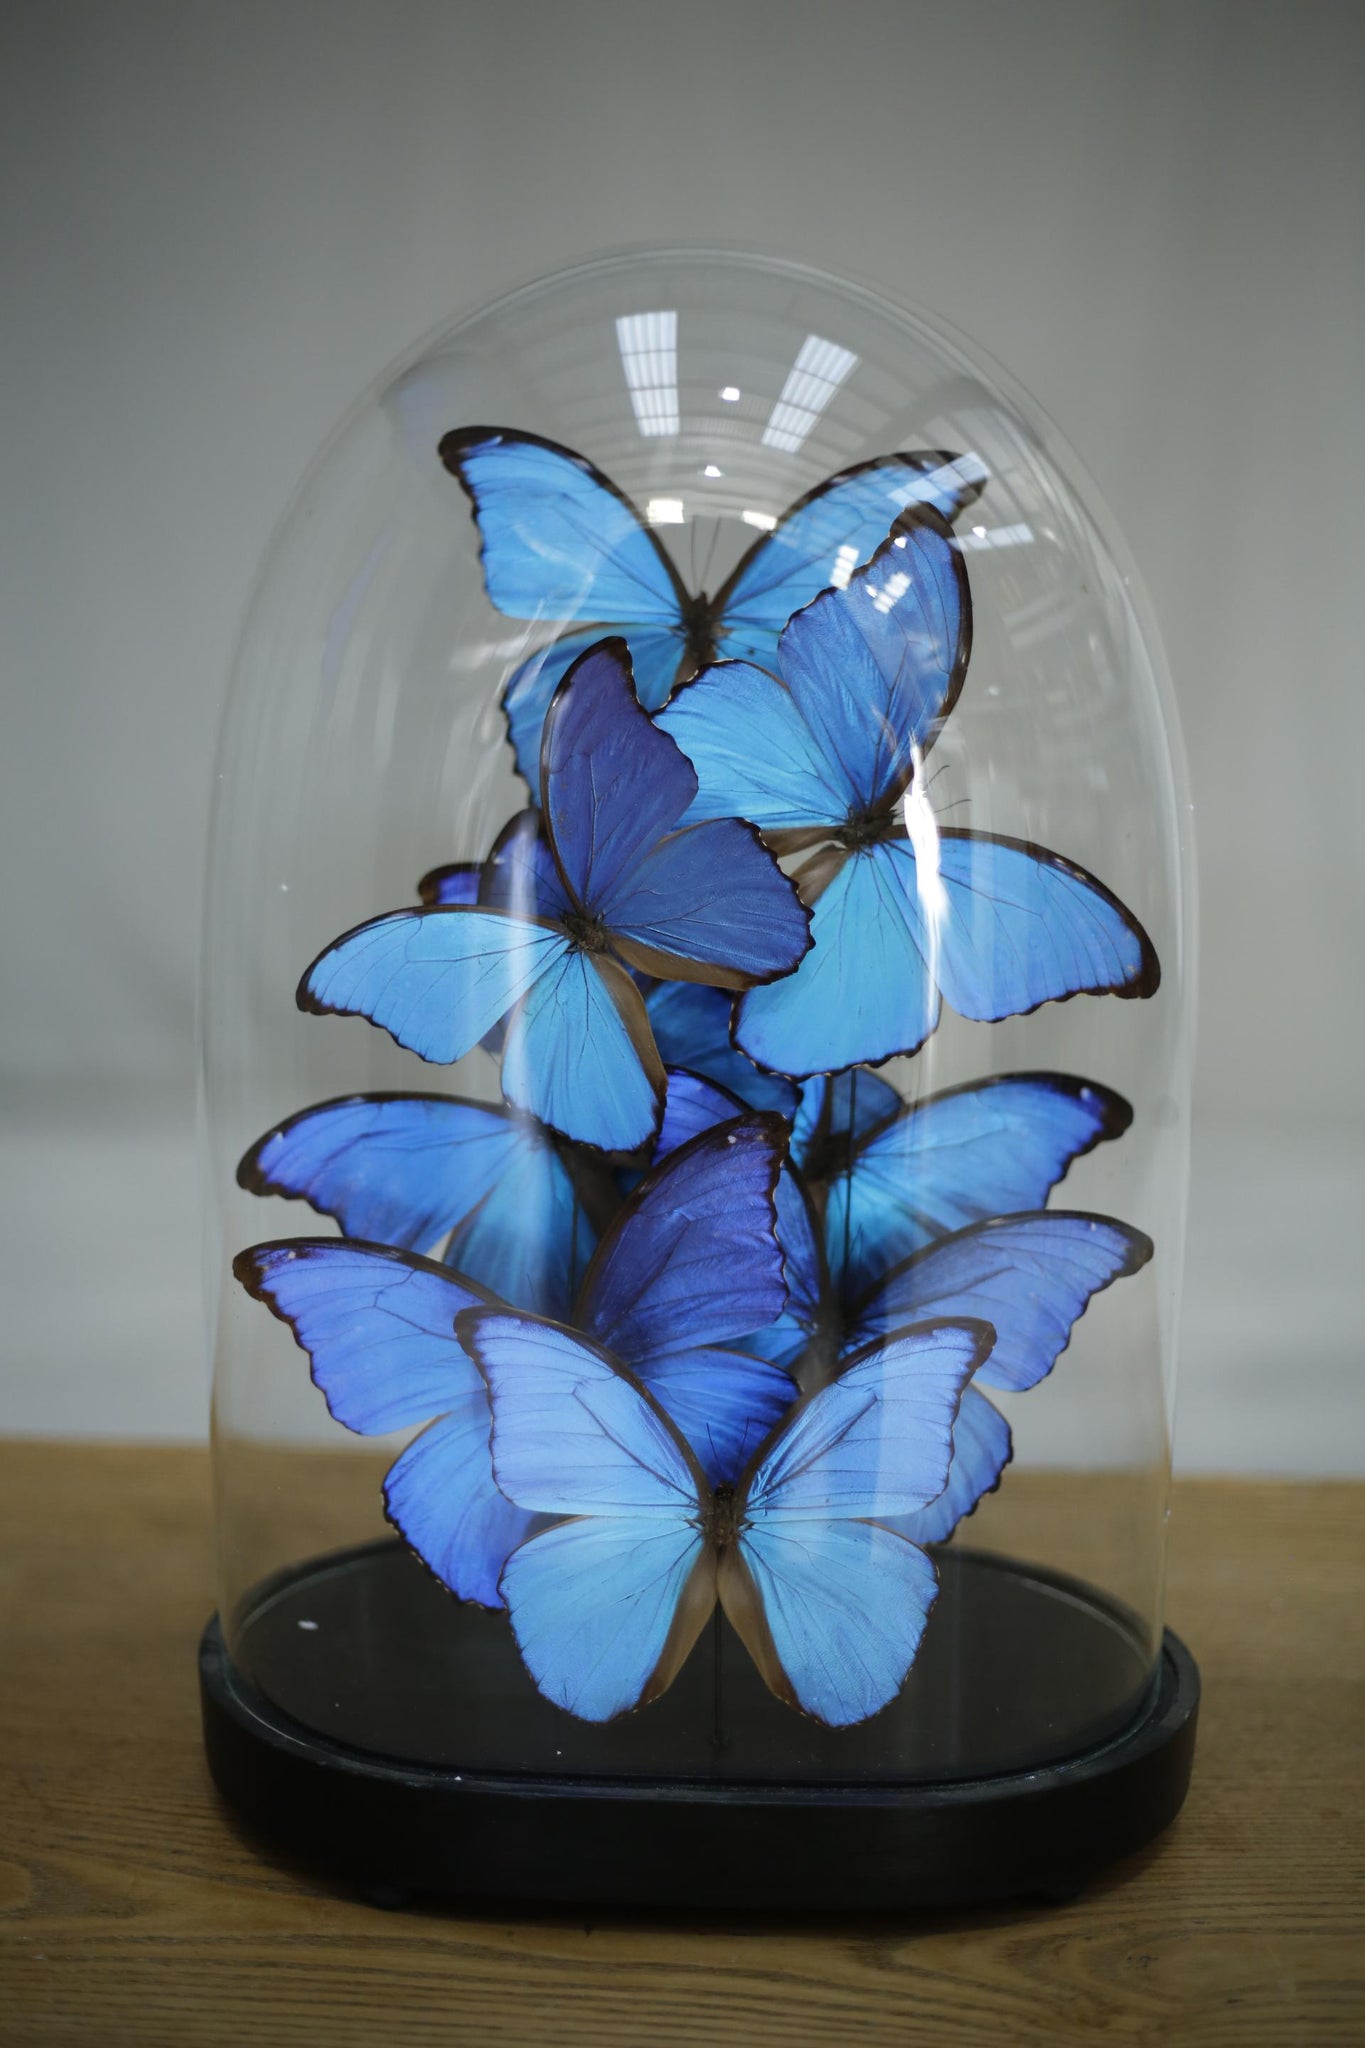 Large glass dome filled with blue morpho butterflies